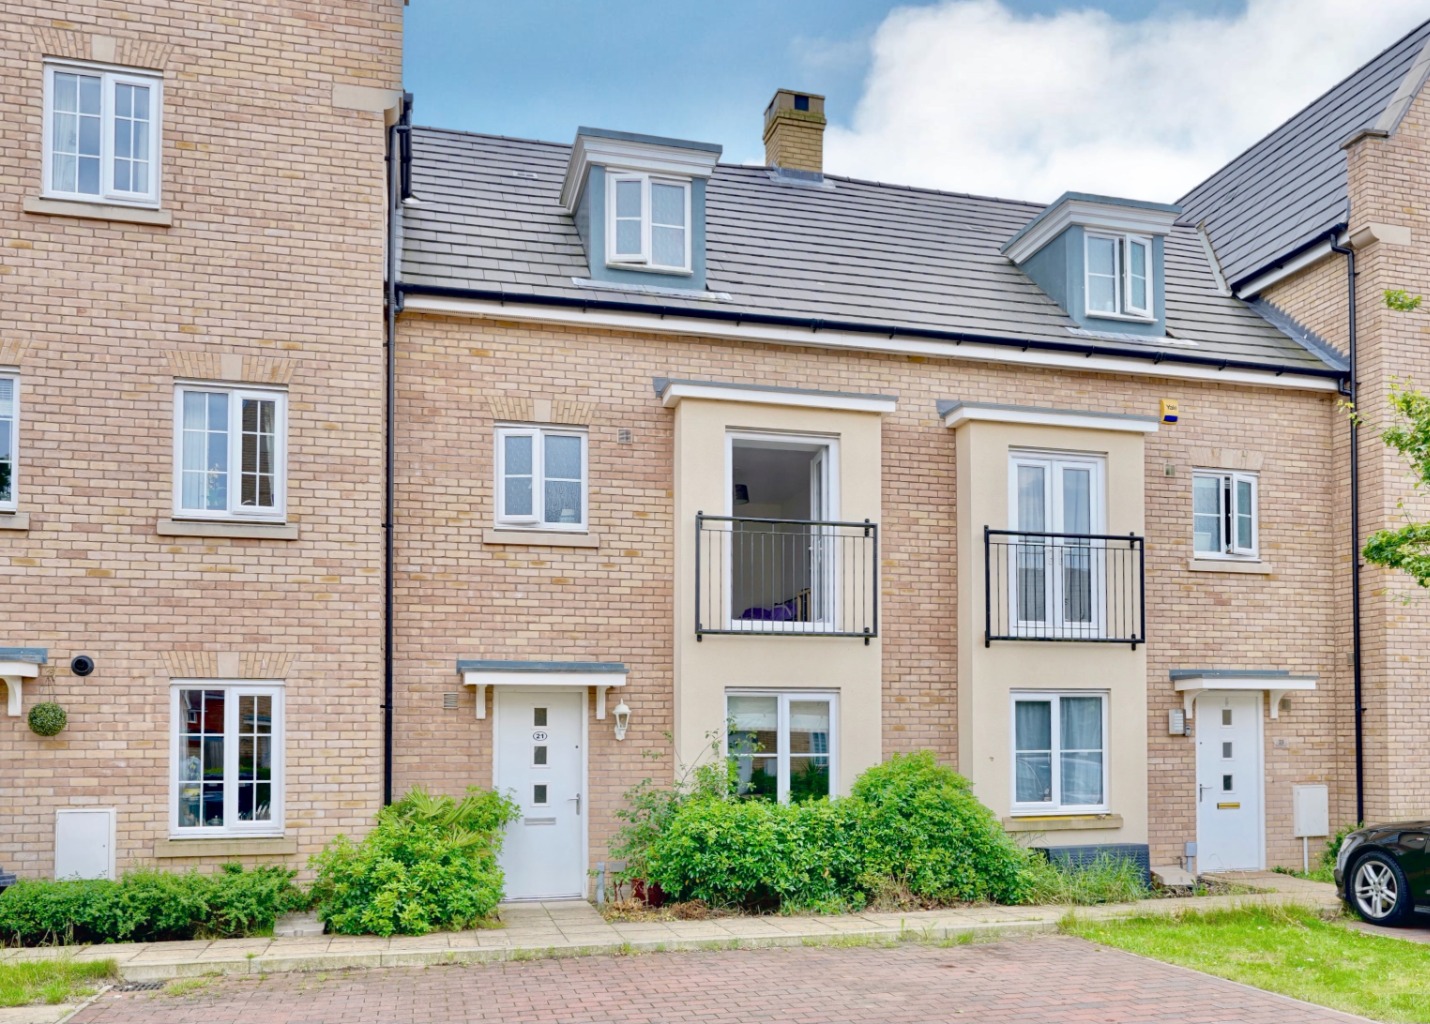 4 bed town house for sale in Buttercup Avenue, St. Neots - Property Image 1